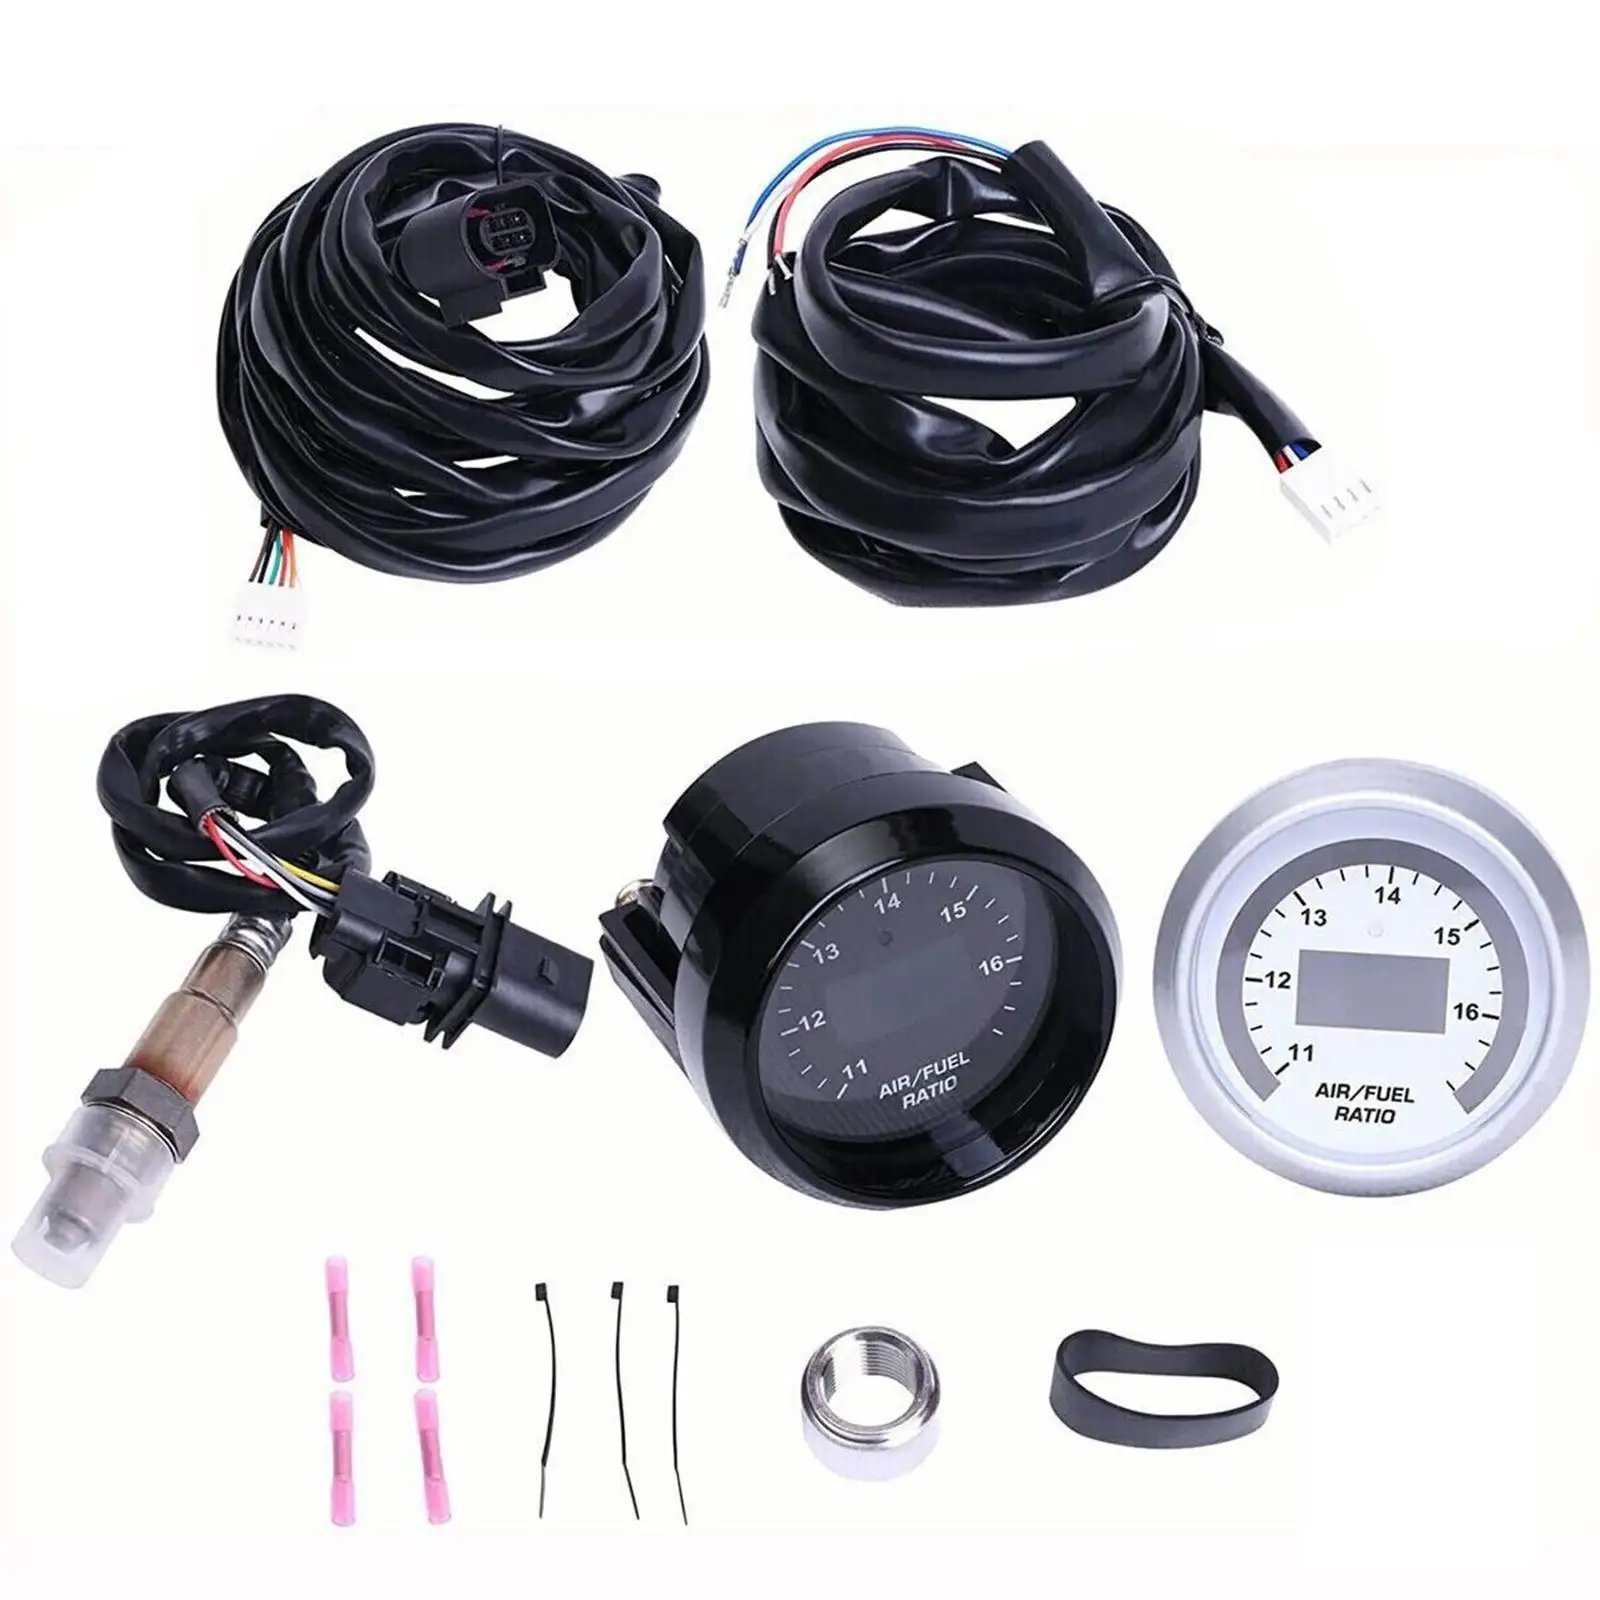 30-4110 Easy to Read with 4.9 Sensor Replaces Easy to Install Data Logging Durable Air Fuel Ratio Gauge Controller Gauge Set